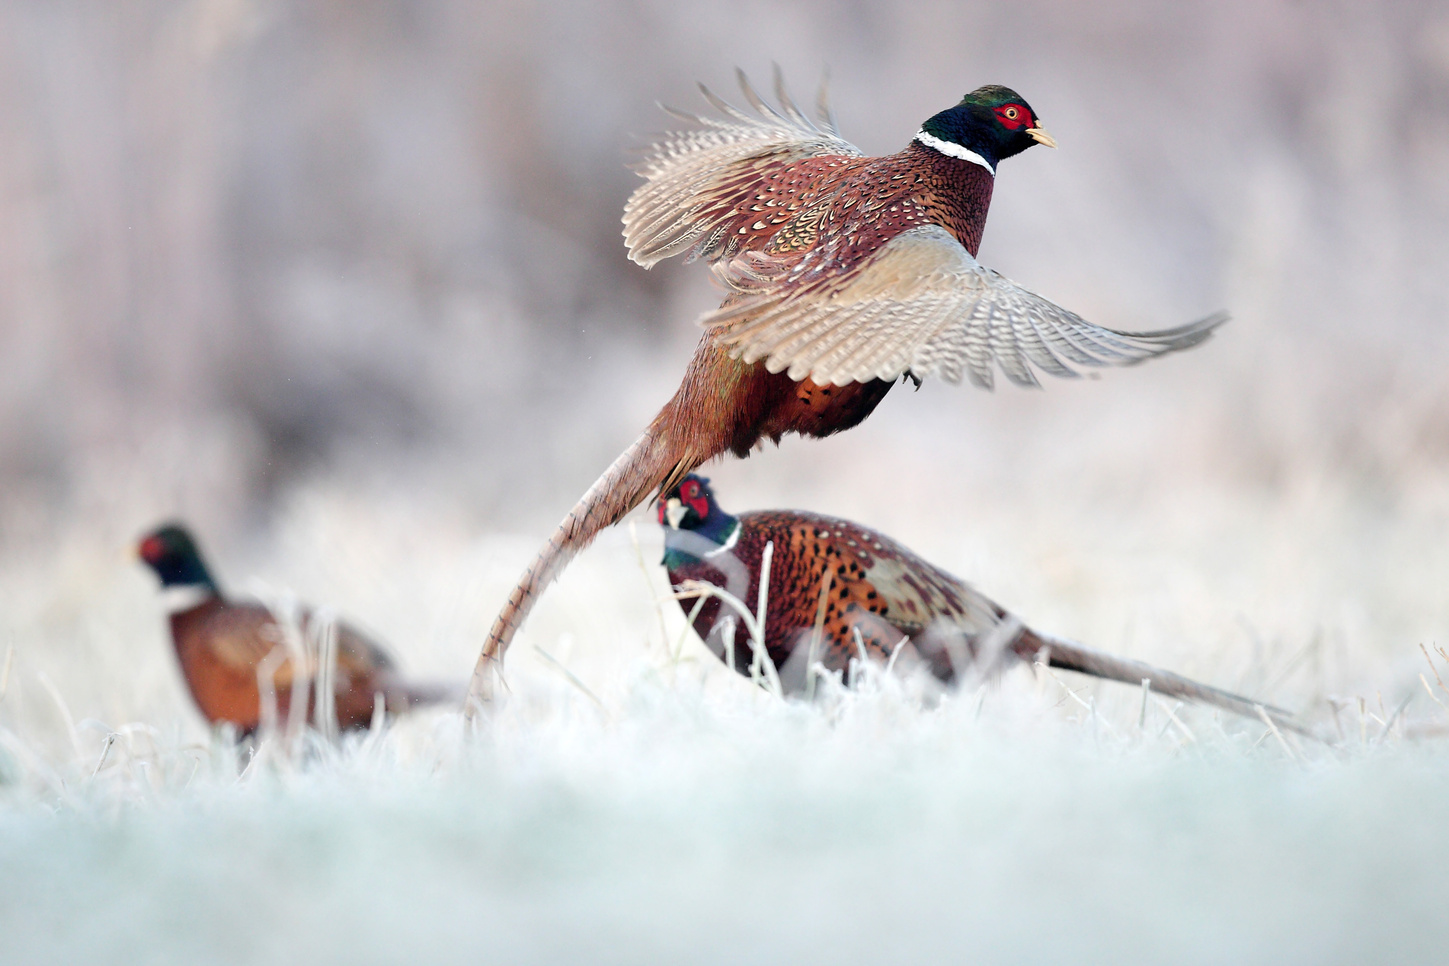 Two Chinese Ringneck pheasants